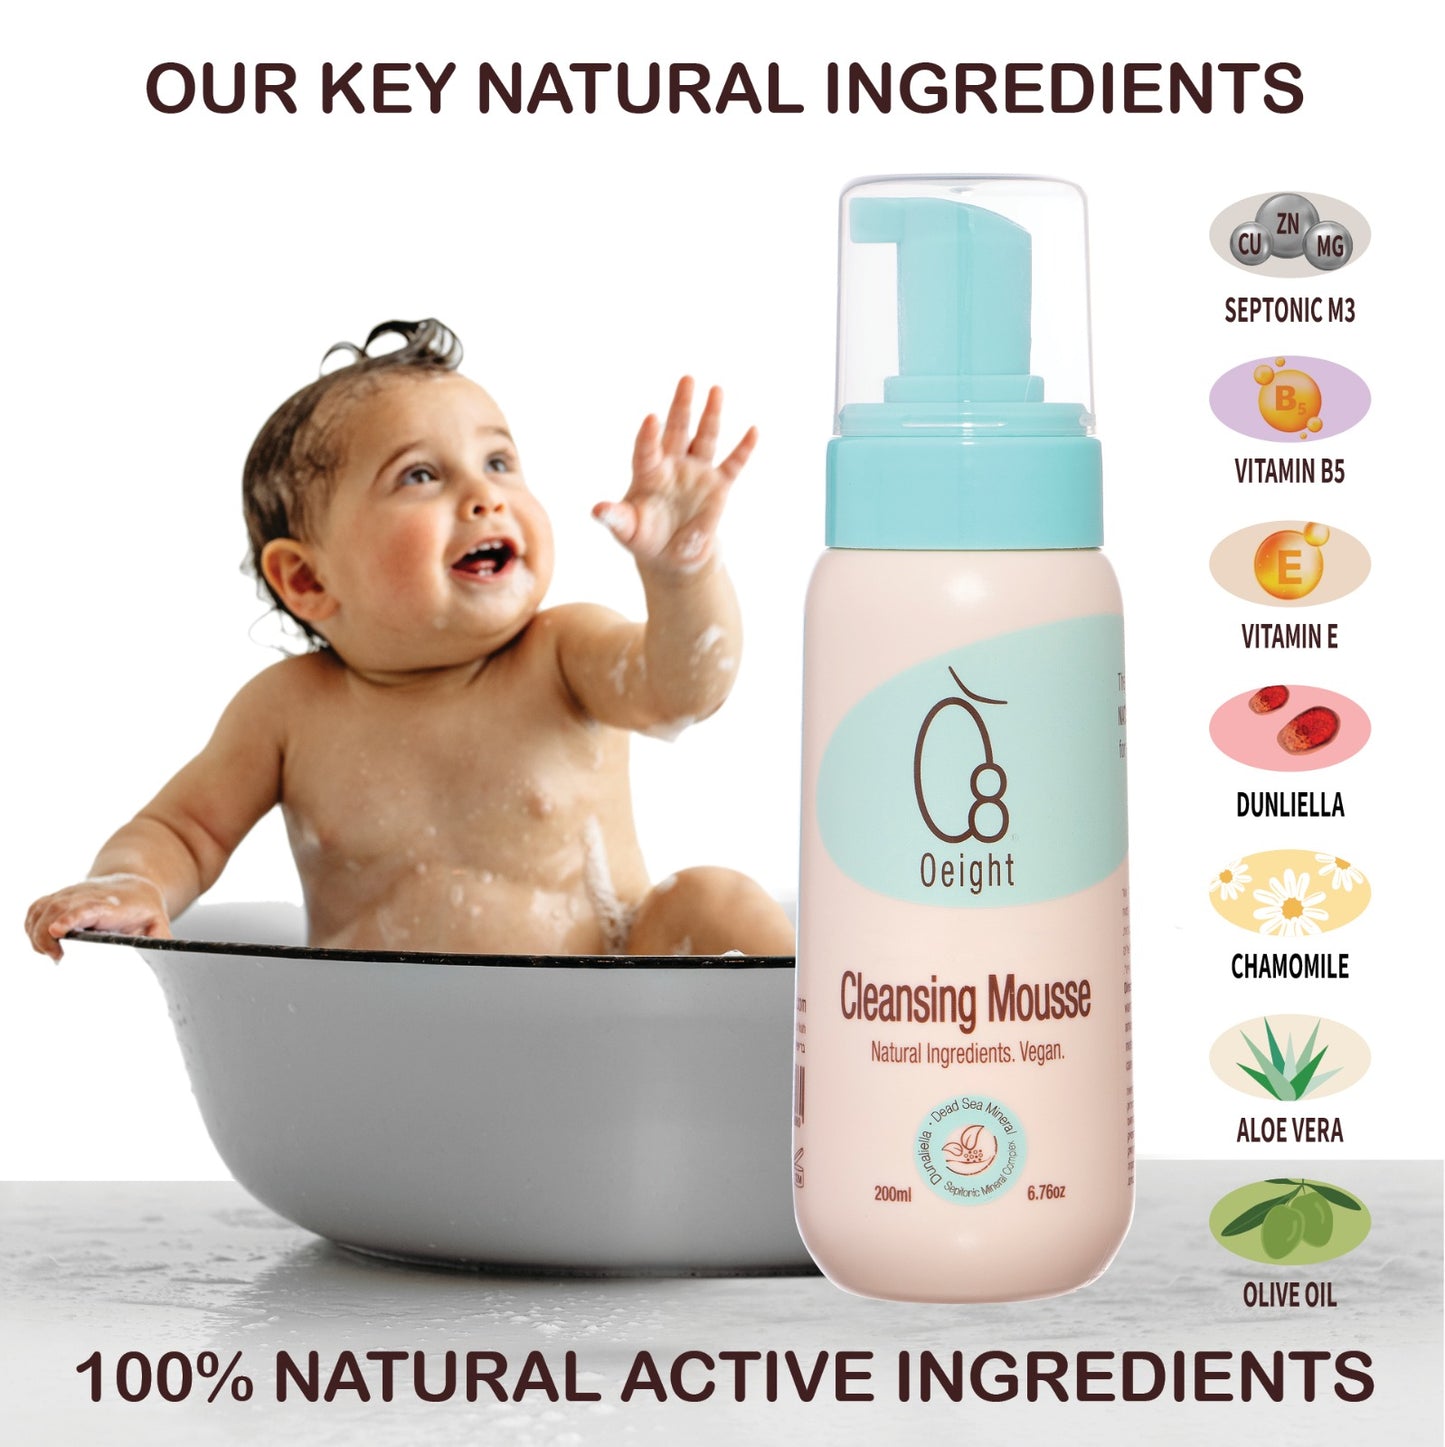 O8 Oeight Cleansing Mousse: Natural Baby Body Wash Foam with Dunaliella Salina, Dead Sea Minerals, Soothes, Softens, Energizes, Protects Skin, 6.76 Oz